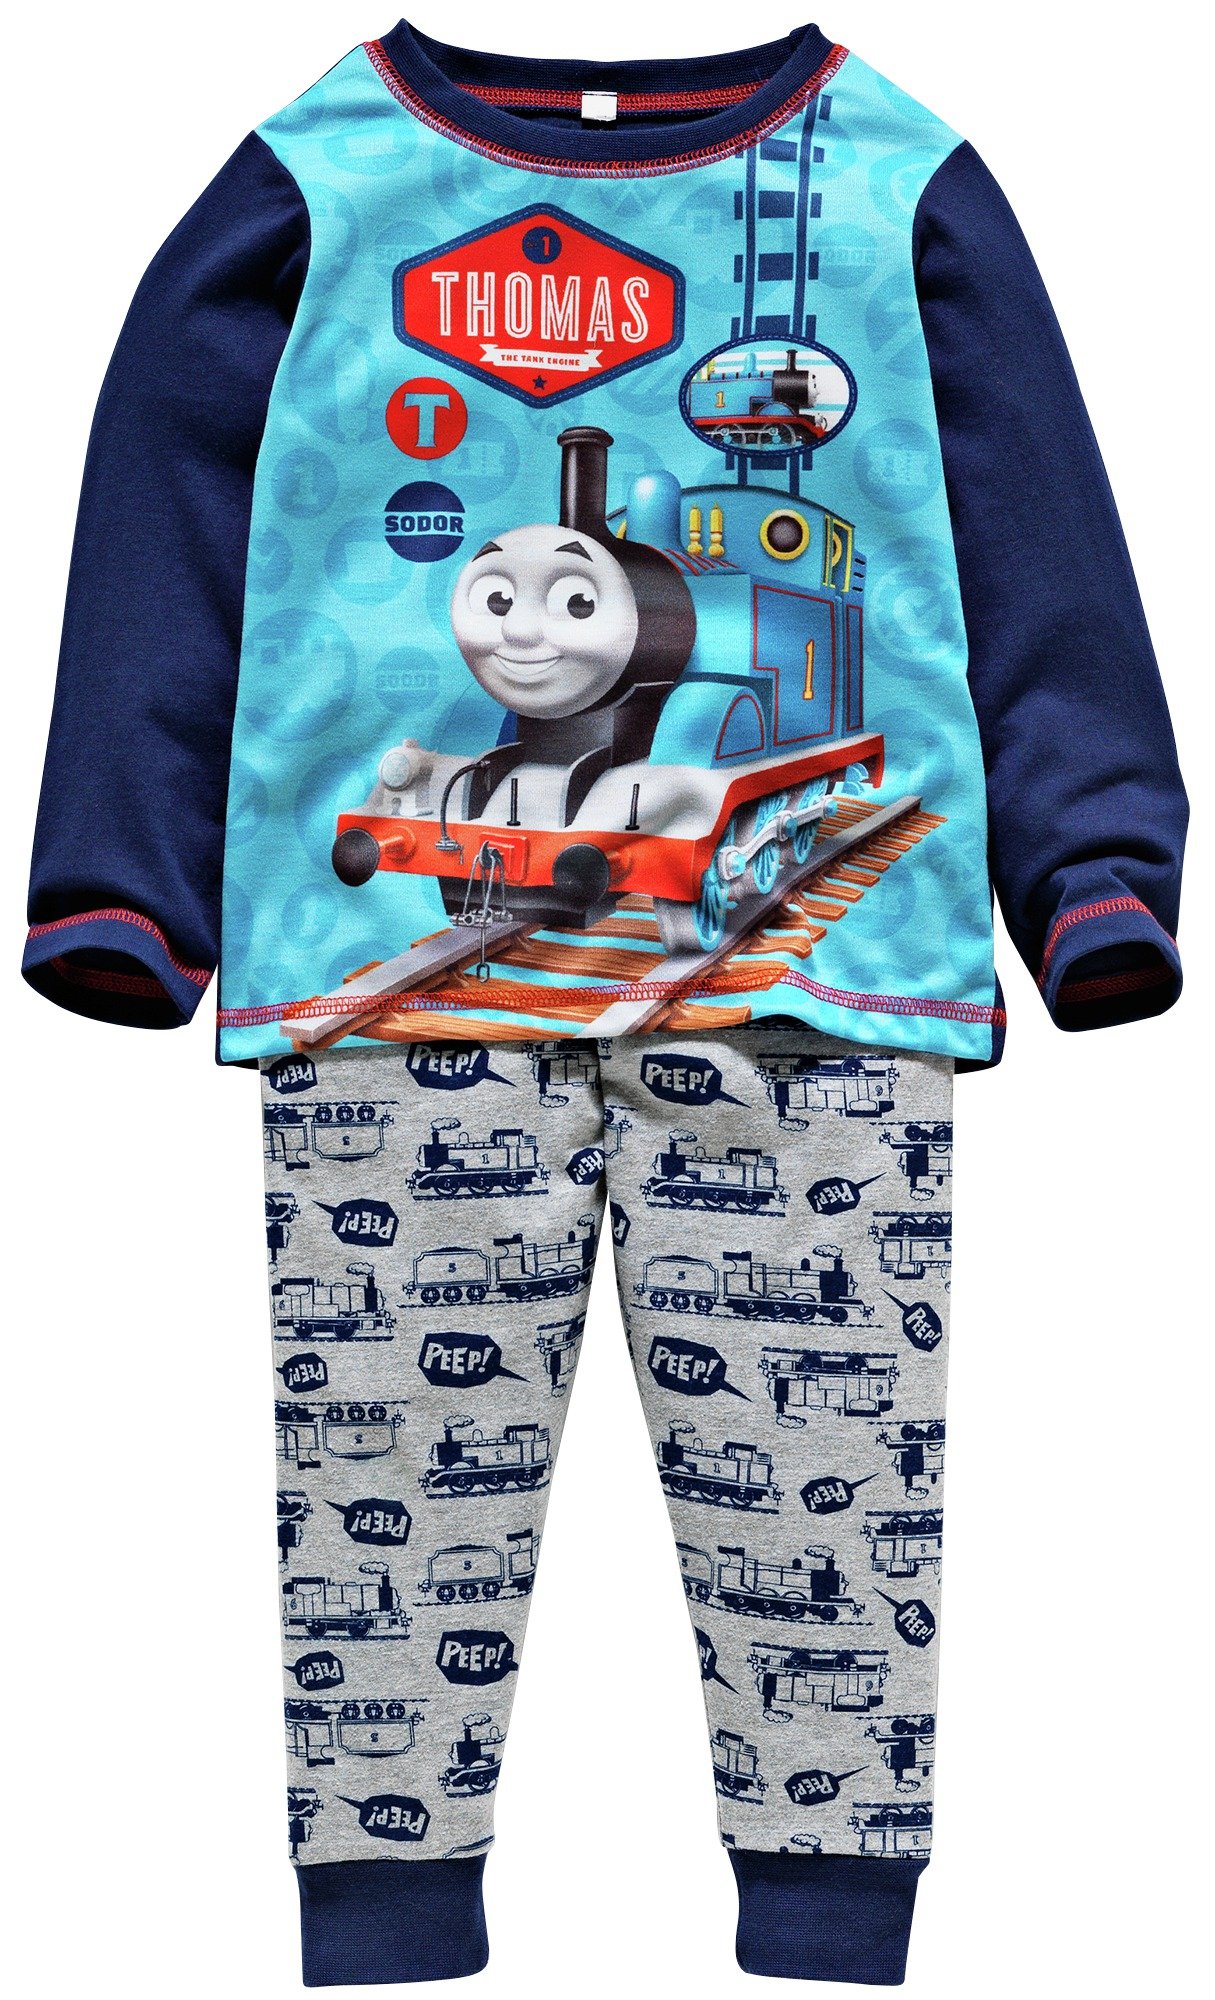 Review of Thomas and Friends Pyjamas - 3-4 Years